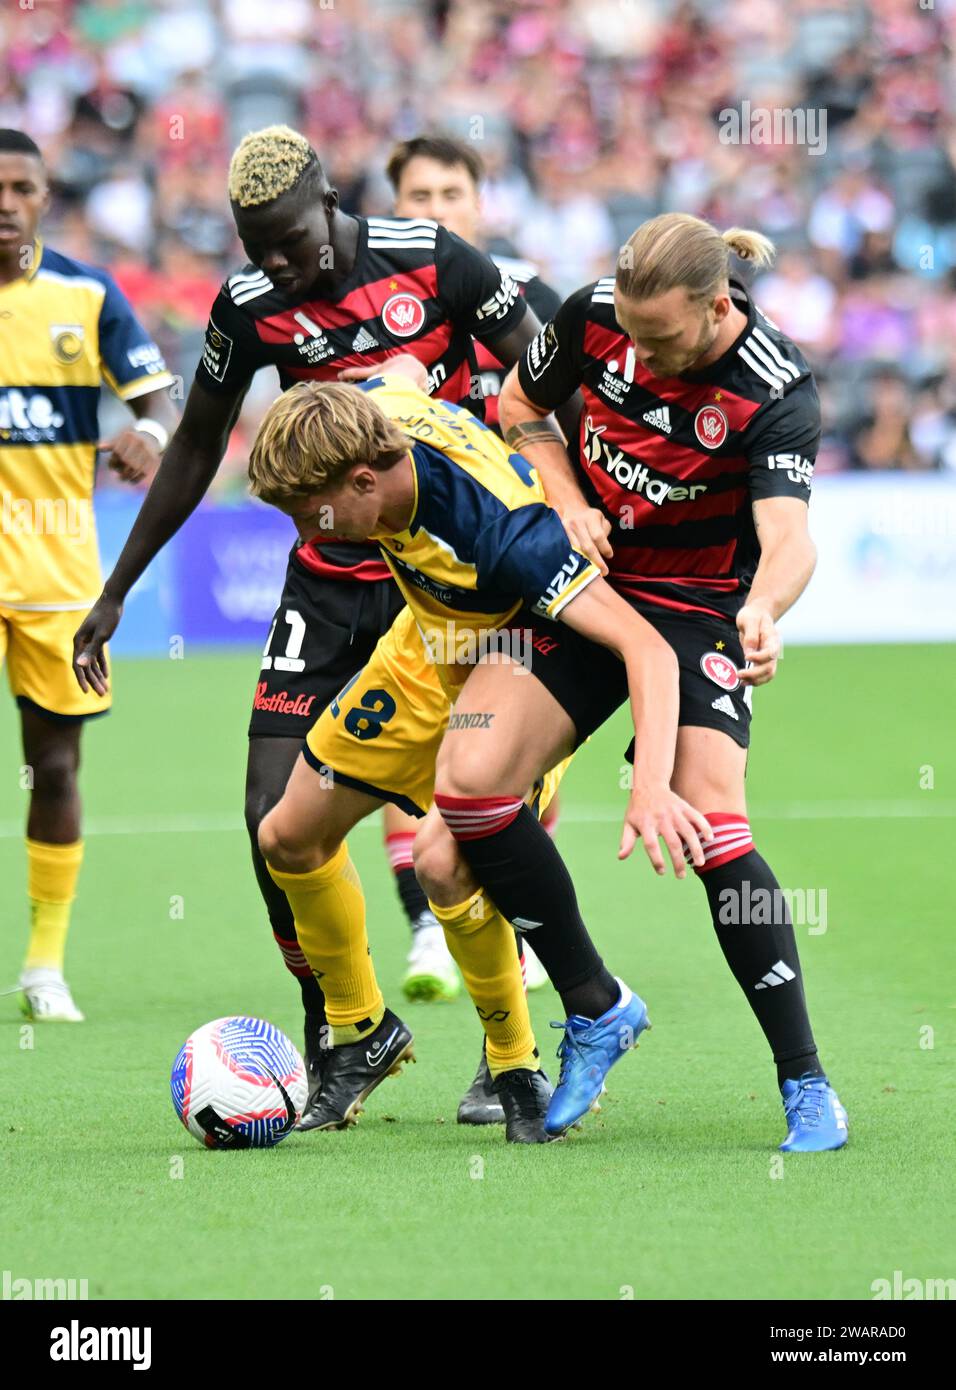 Parramatta, Australia. 06th Jan, 2024. Jacob Brett Farrell (C) of the Central Coast Mariners, Valentino Kuach Yuel (L) and Jorrit Petrus Carolina Hendrix (R) of the Western Sydney Wanderers FC seen in action during the 2023-24 A-League Men's season round 11 match between Western Sydney Wanderers FC and Central Coast Mariners at CommBank Stadium. Final score; Central Coast Mariners 1: 0 Western Sydney Wanderers. Credit: SOPA Images Limited/Alamy Live News Stock Photo